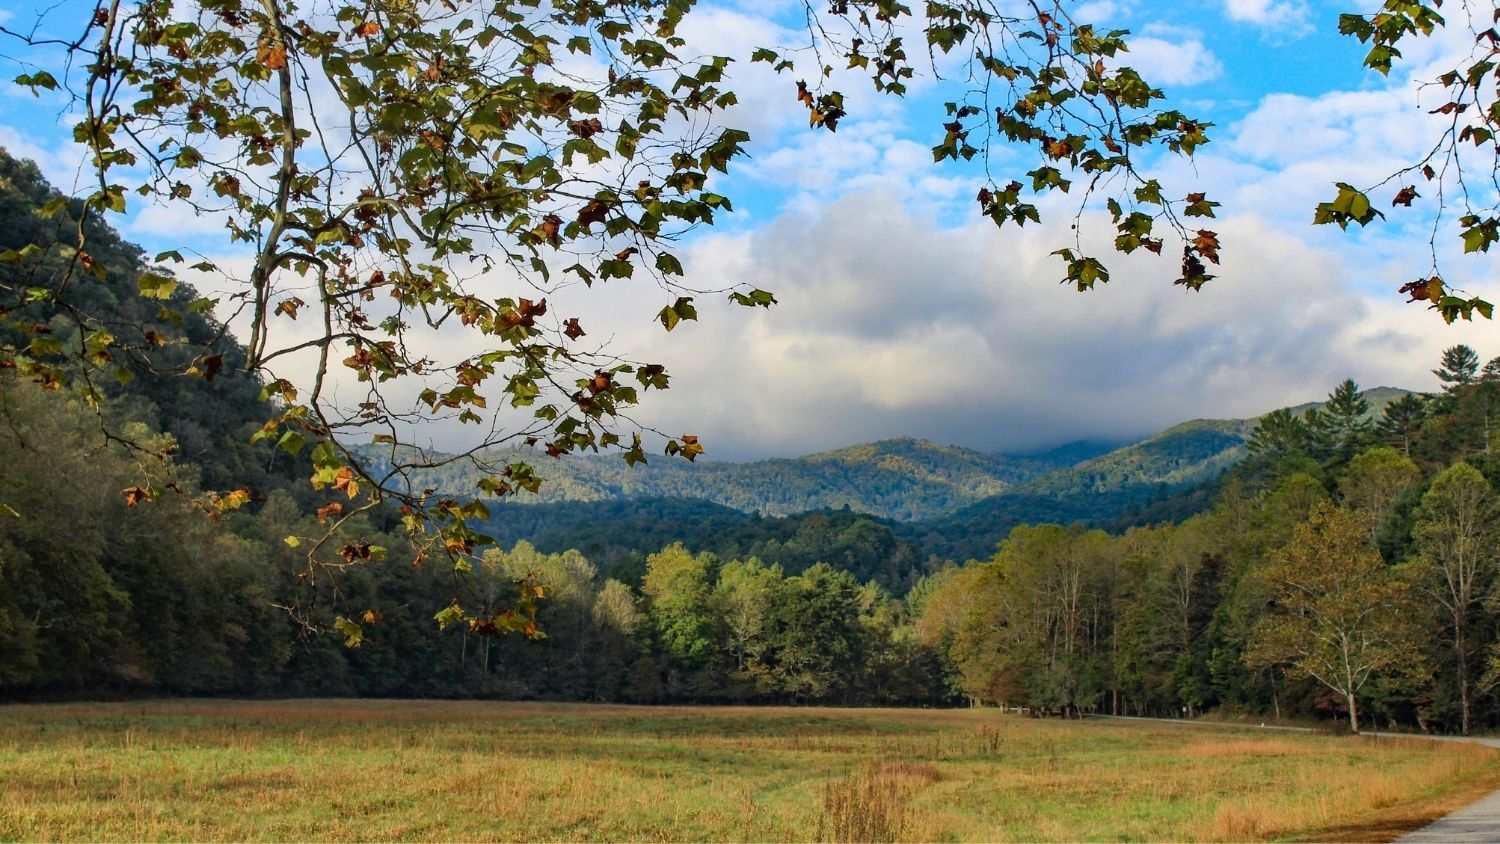 Great Smoky Mountains National Park - Analysis: Studies of U.S. National Parks Are Trending Down, Focused on Popular Parks - Parks, Recreation and Tourism Management at NC State University